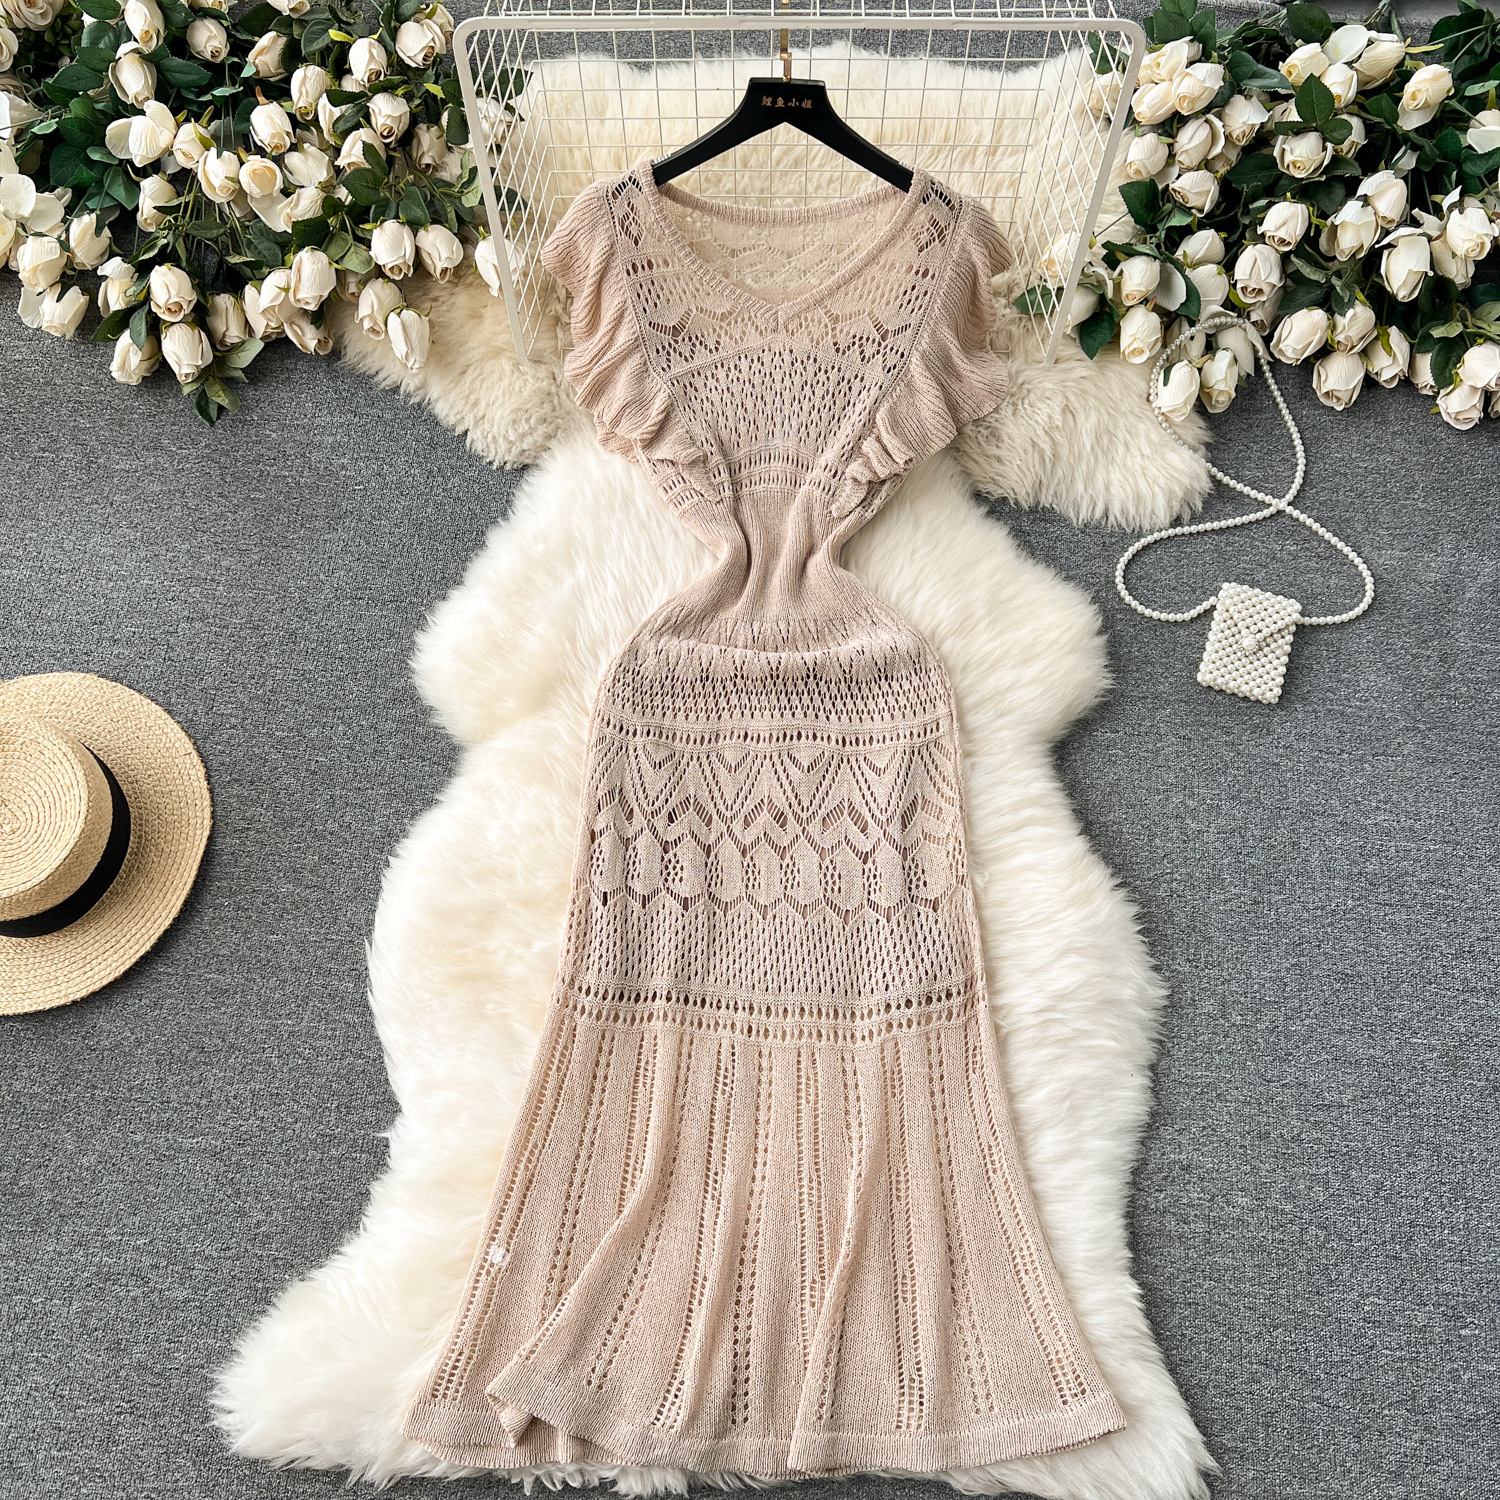 Early spring Korean style dress with sweet flying sleeves design and tie up waist length, heartfelt hollow knit dress